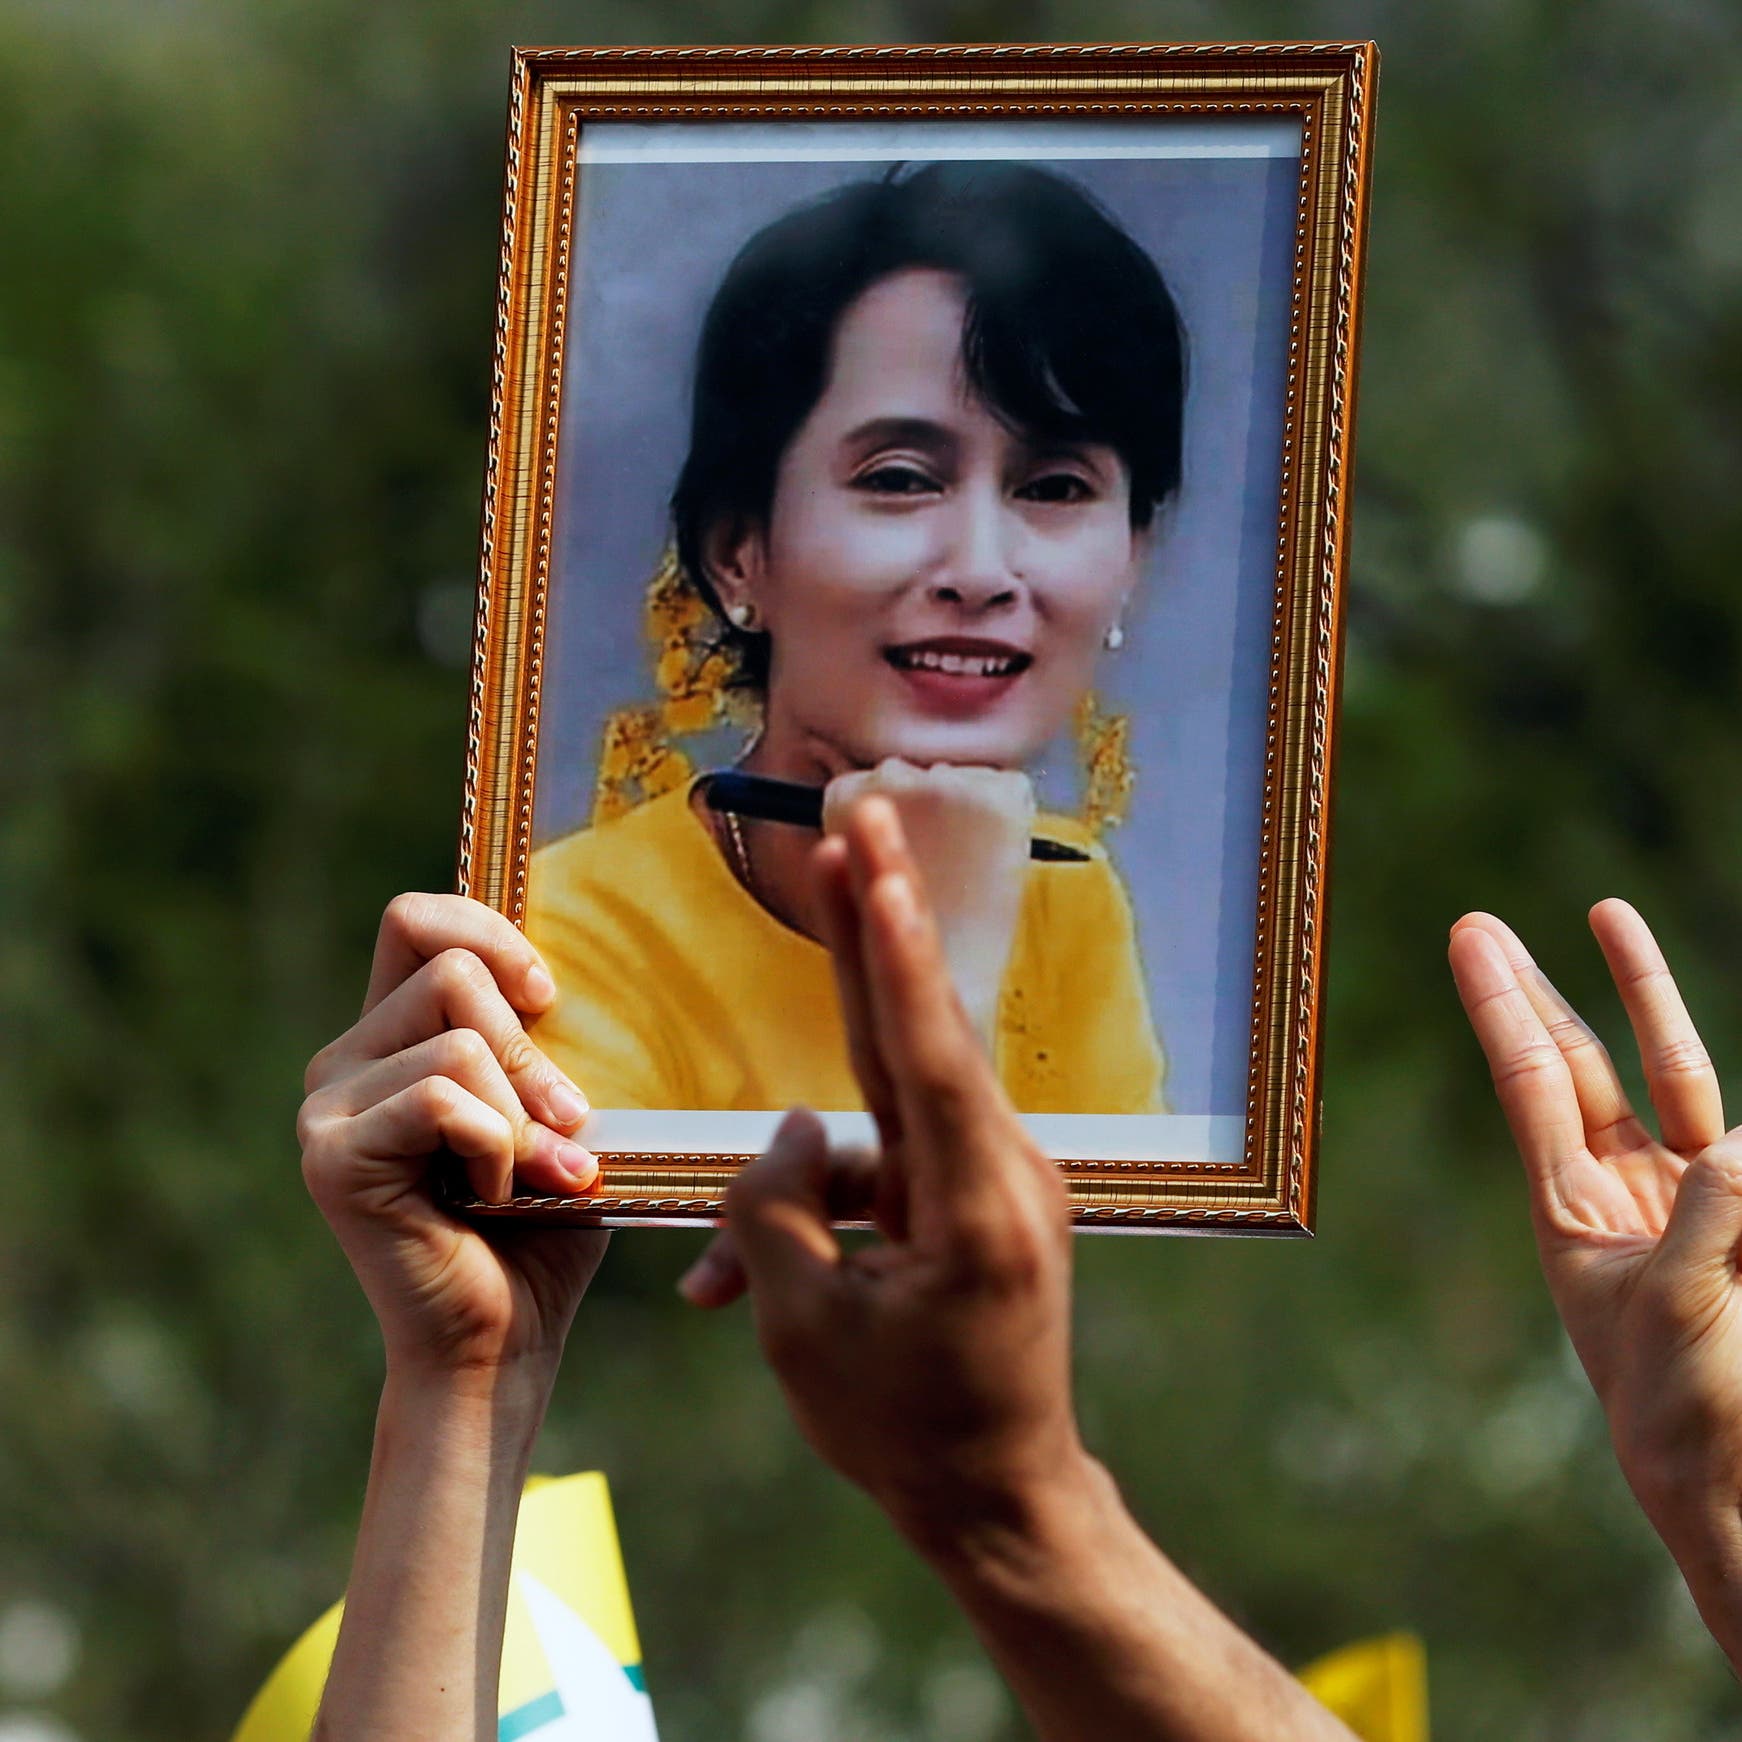 Myanmar electoral body to dissolve Suu Kyi party: News reports 